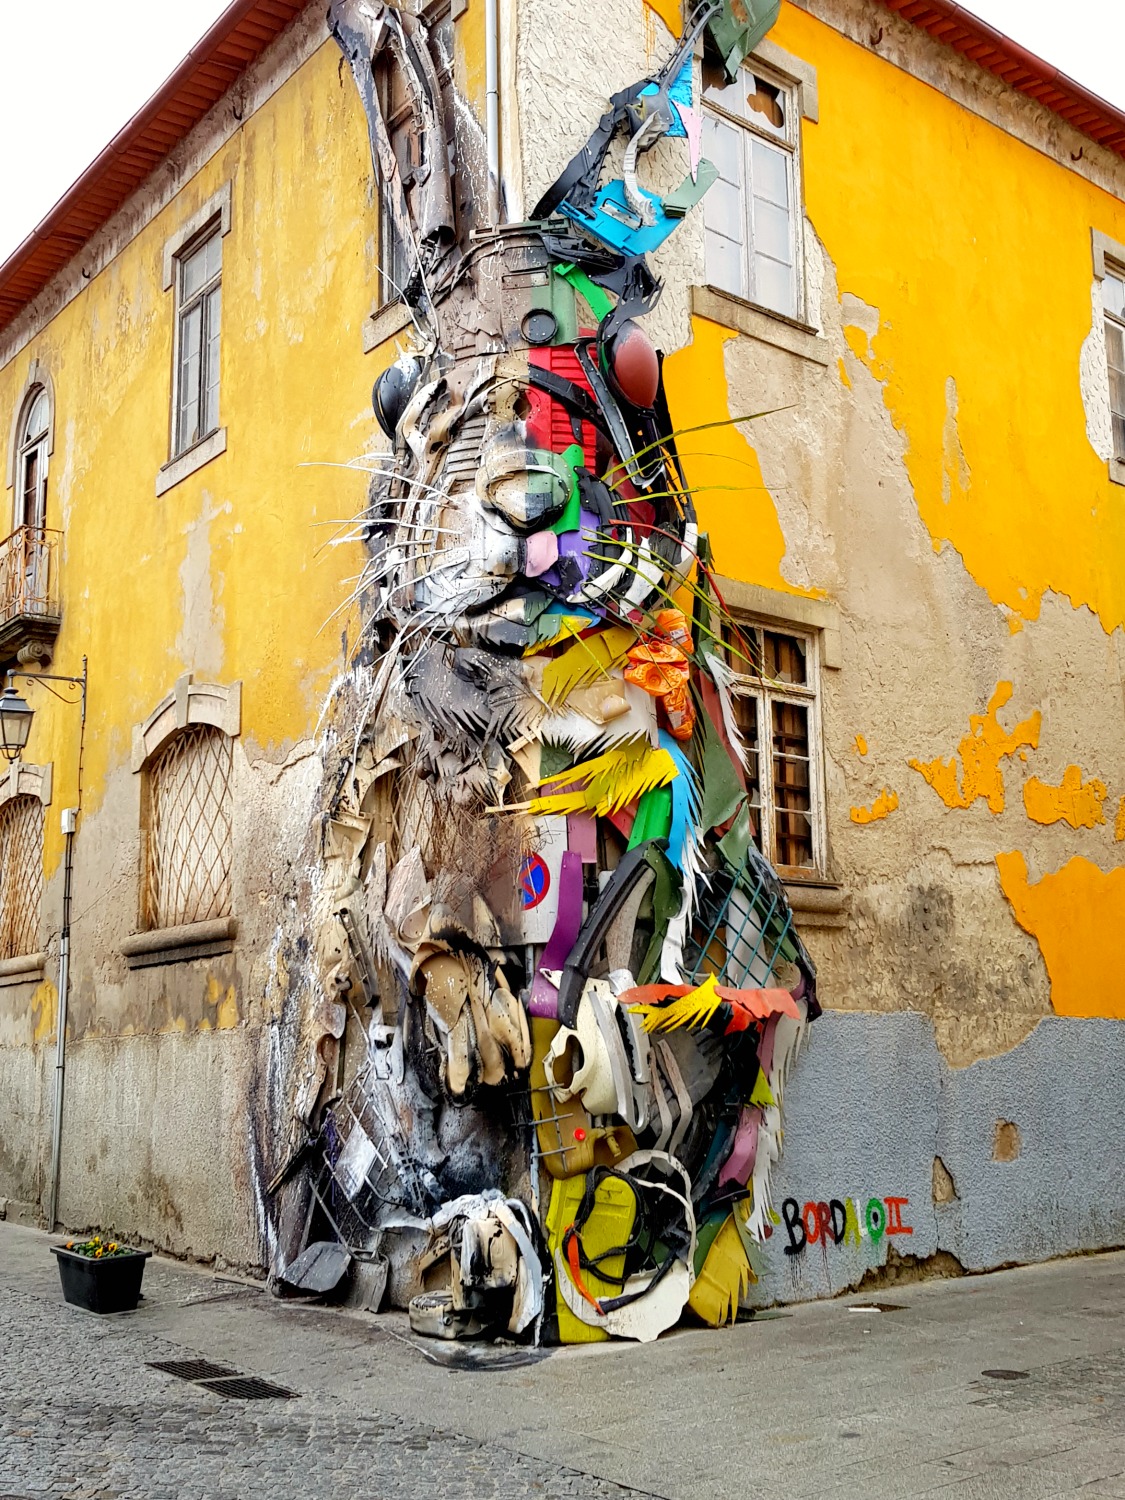 Rabbit street art in Vila Nova de Gaia - one of the more unusual things to see in Porto with kids